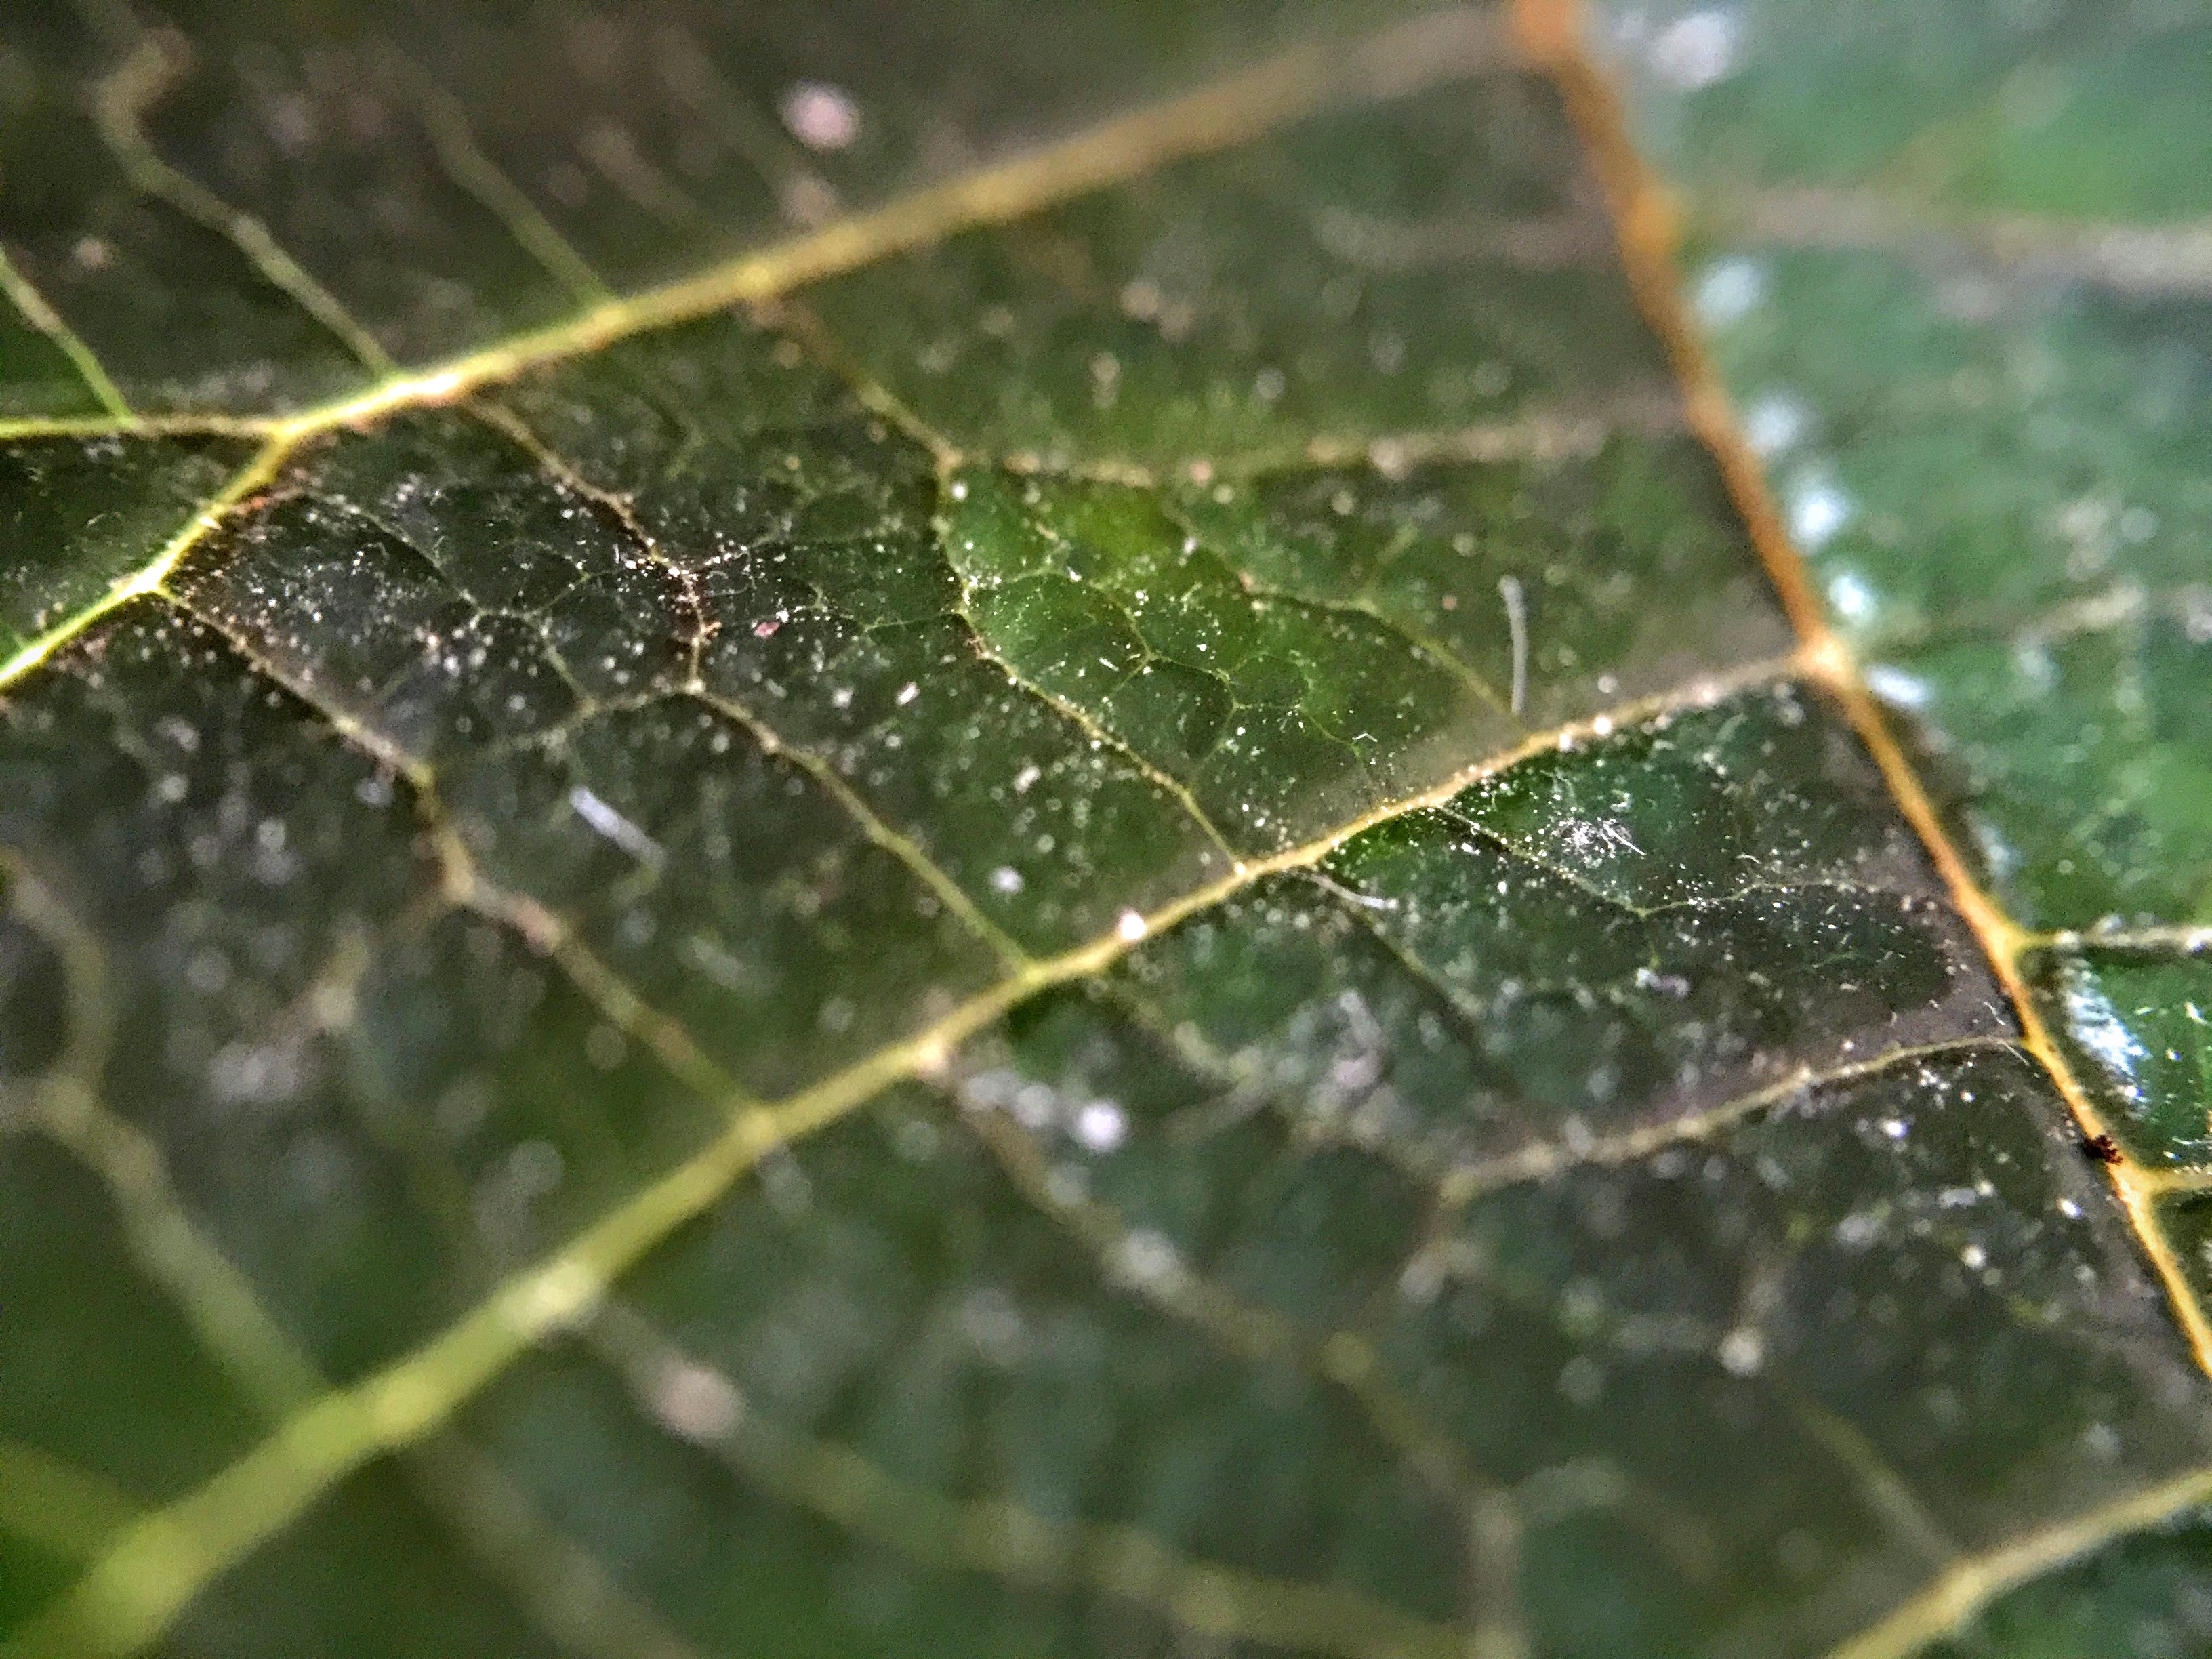 The leaf of a house plant. Once again shot with the Olloclip's 15X macro lens. 